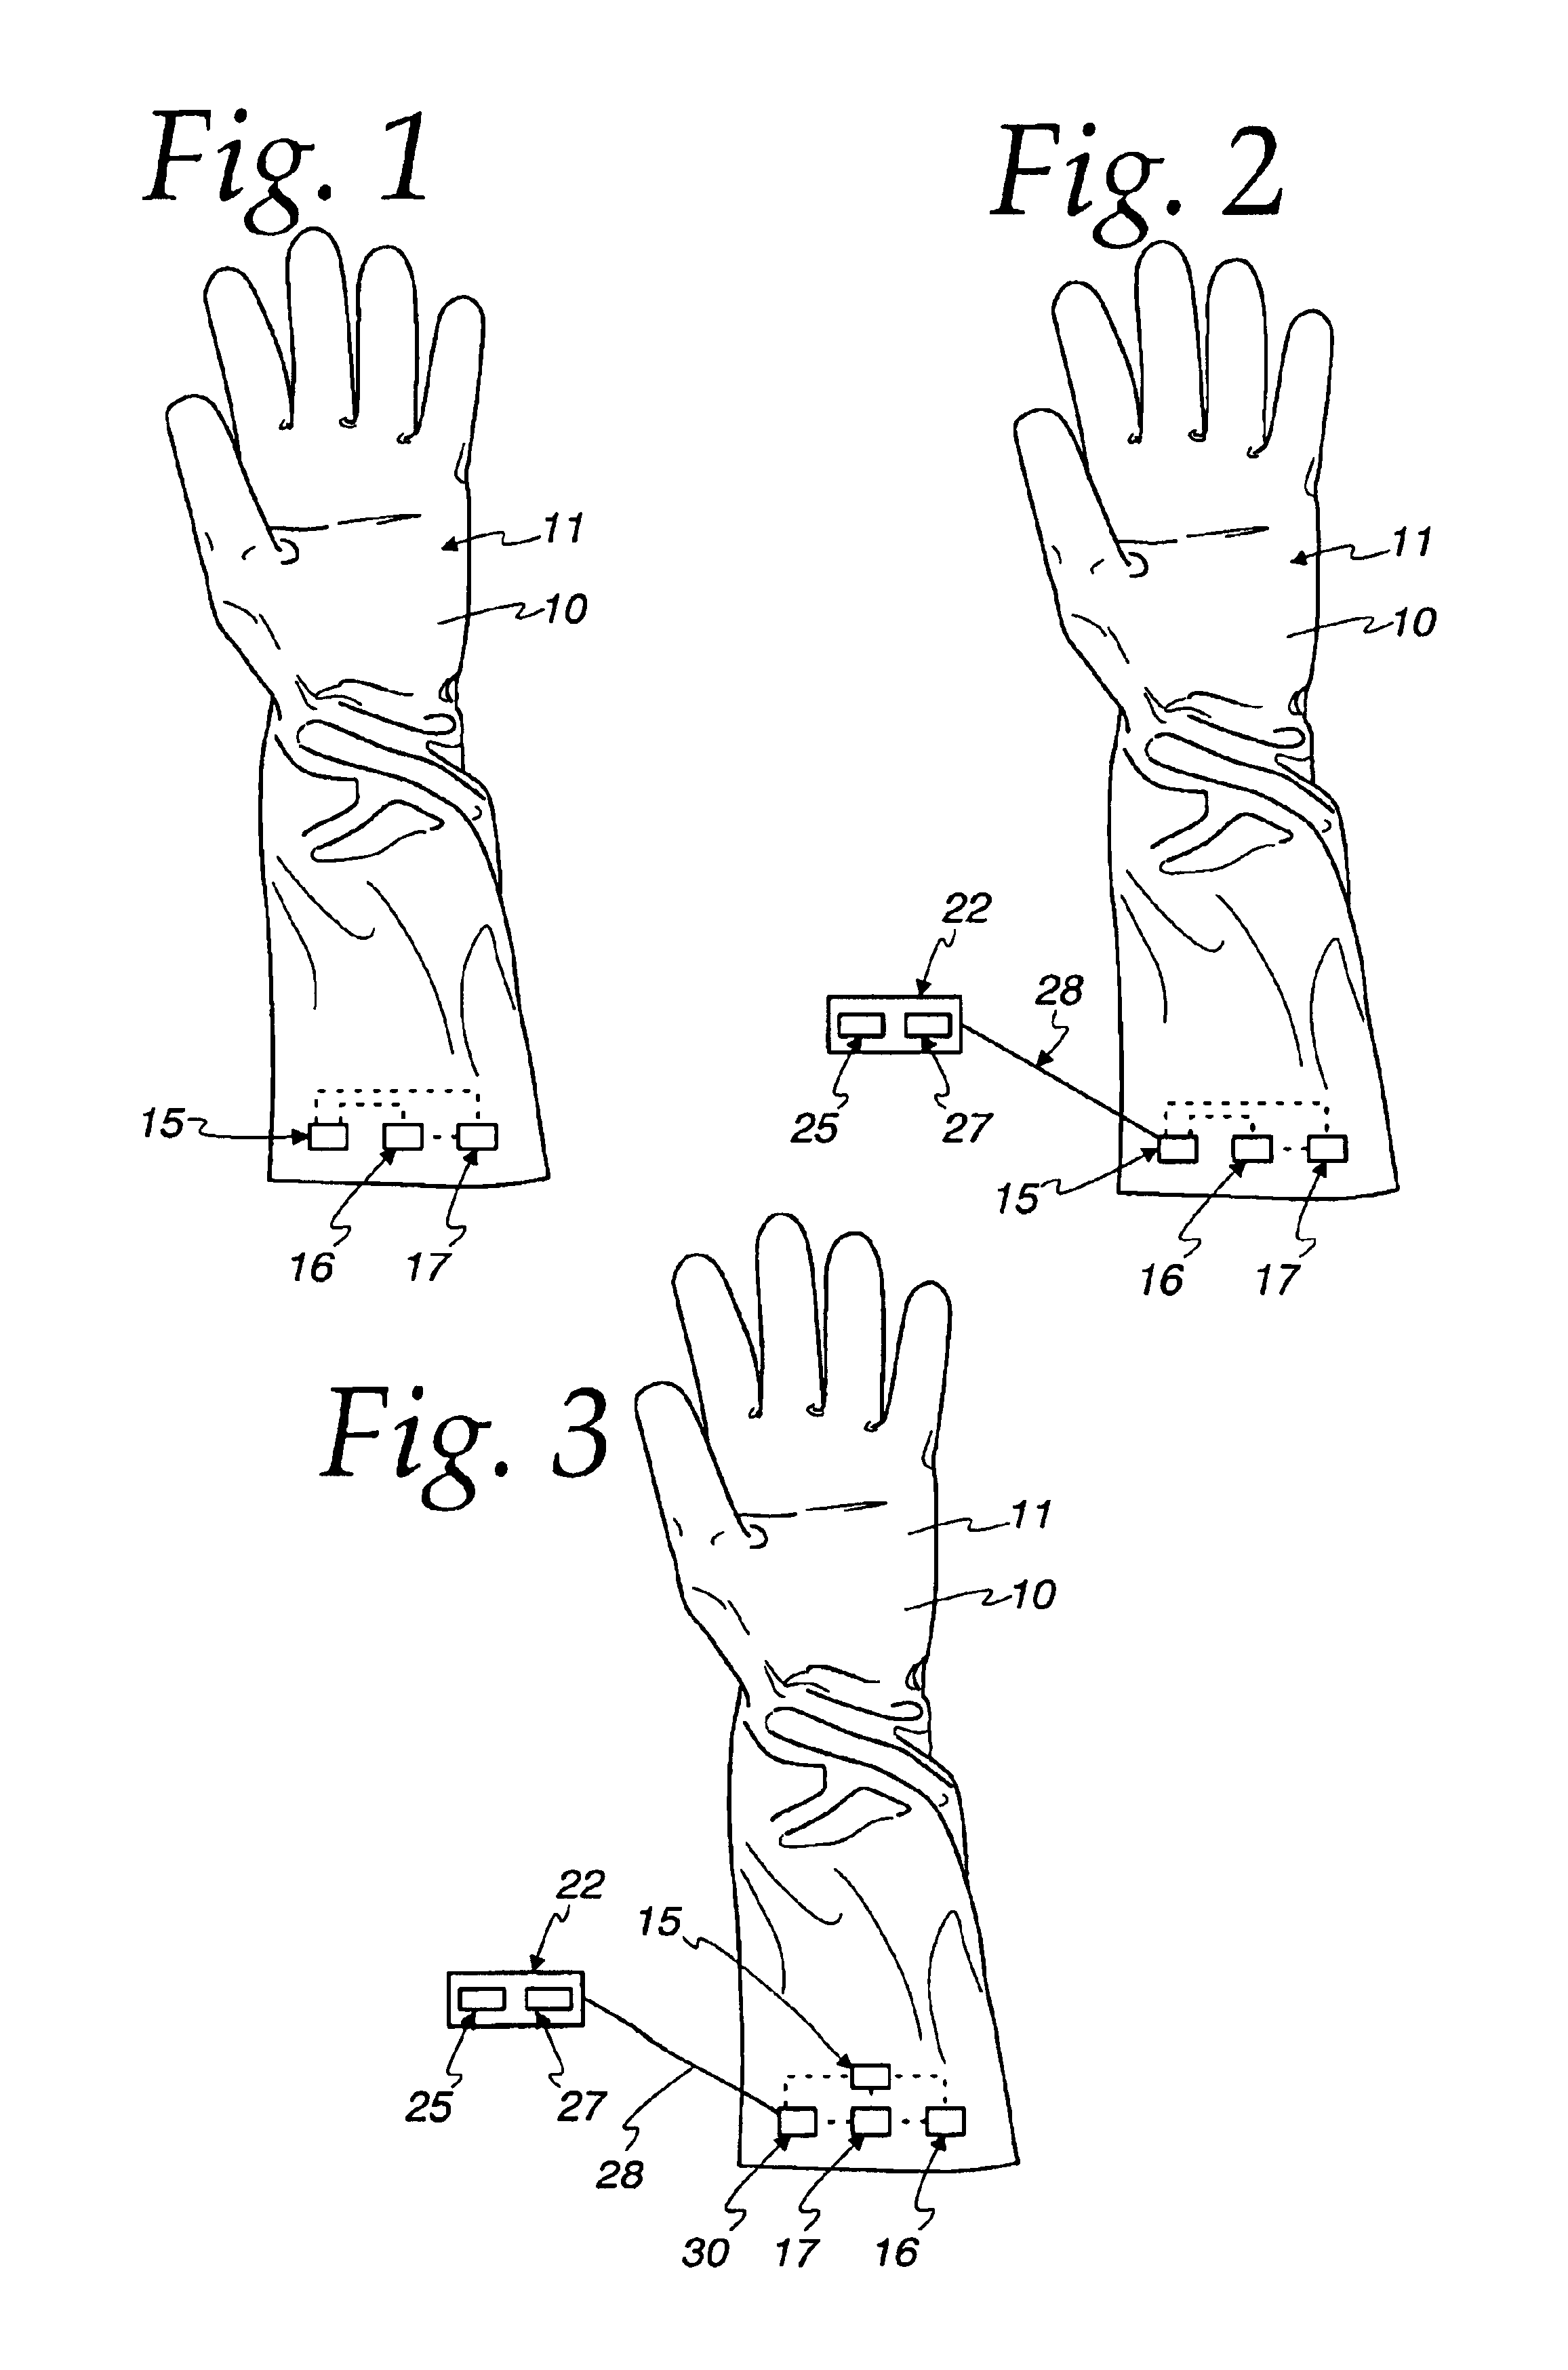 Communicative glove containing embedded microchip